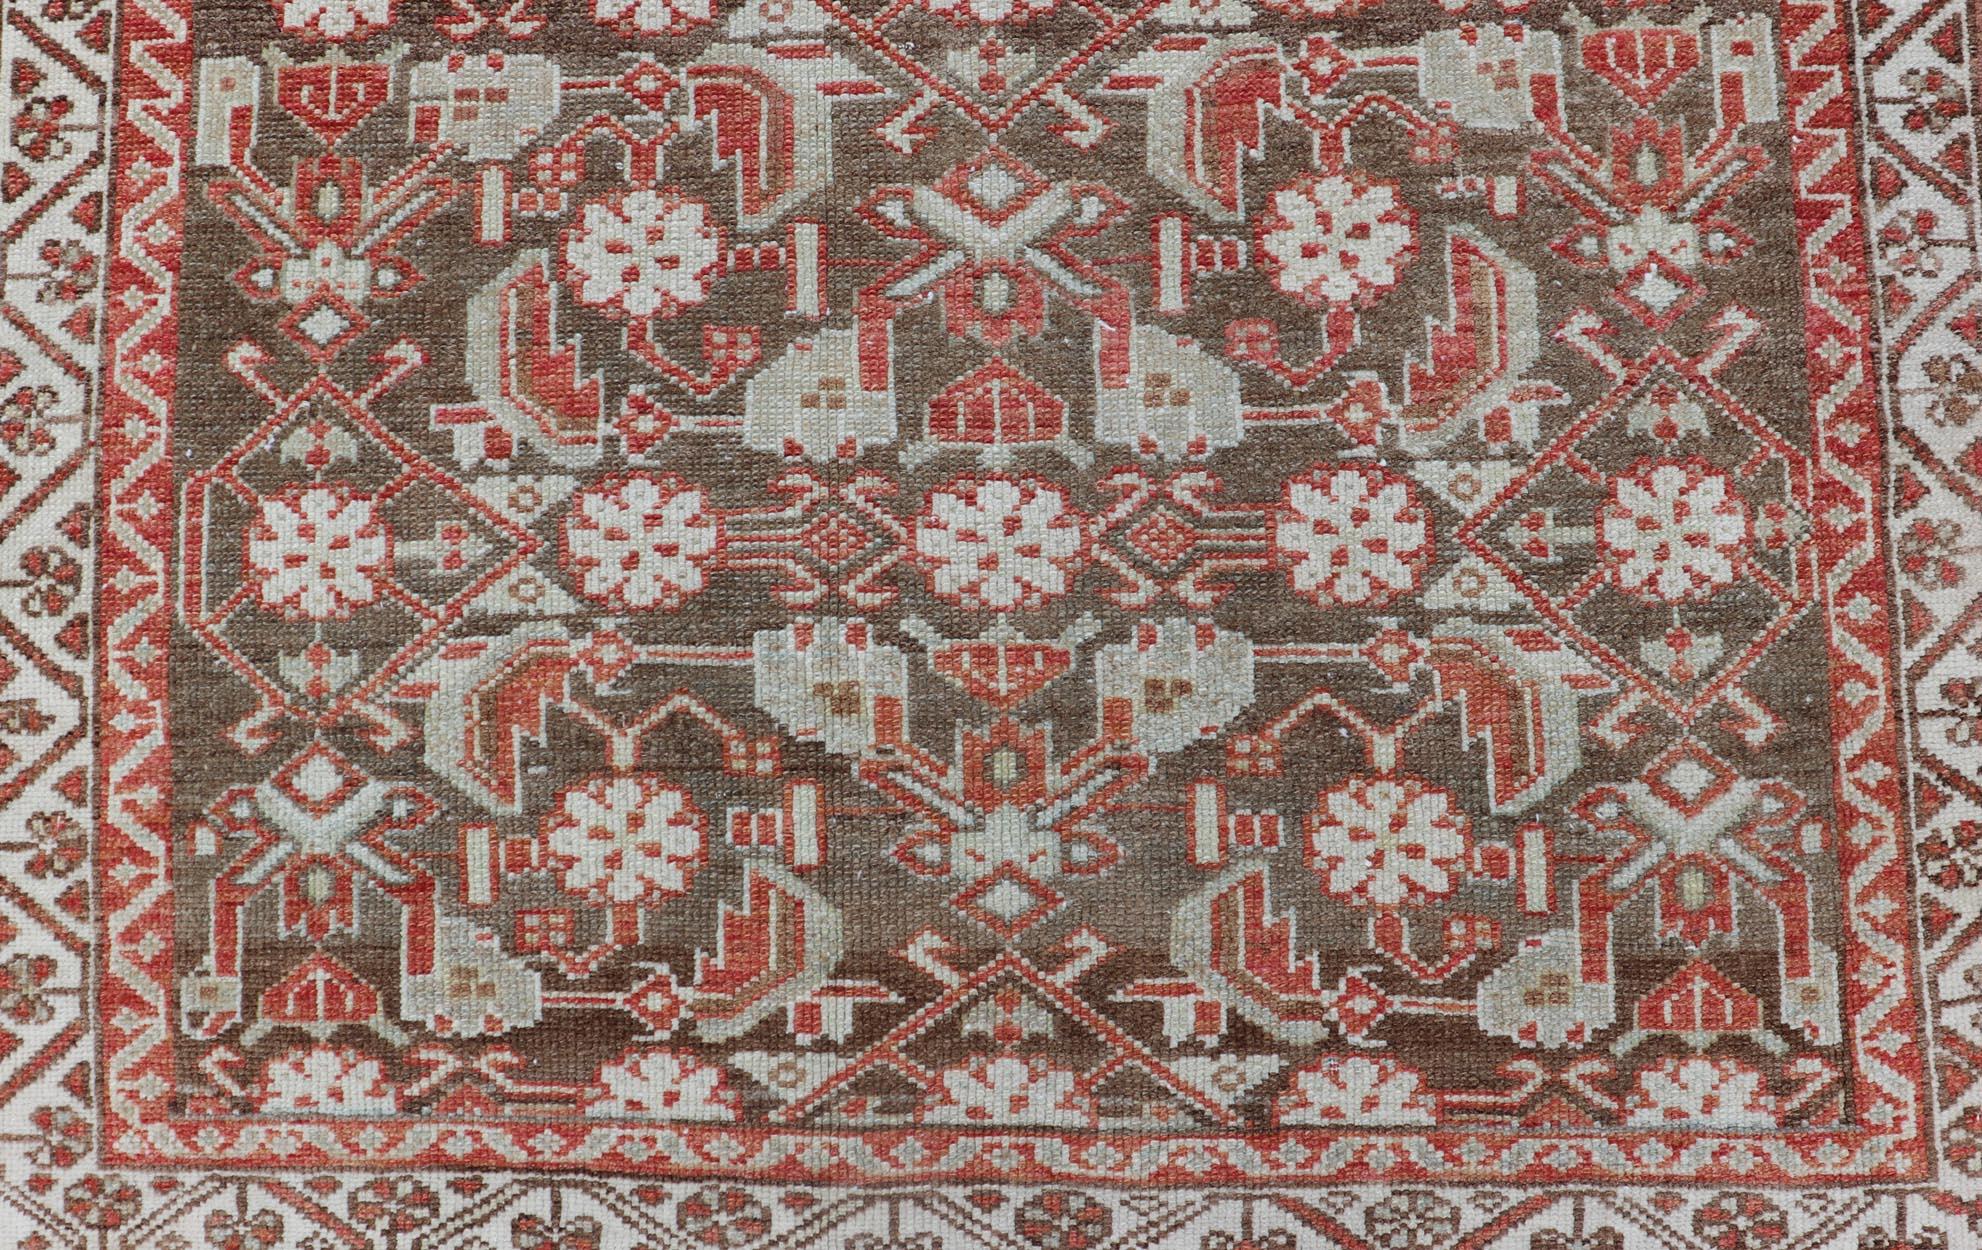 Antique Persian Malayer with Sub-Geometric Floral Design in Reds & Earthy Tones For Sale 2